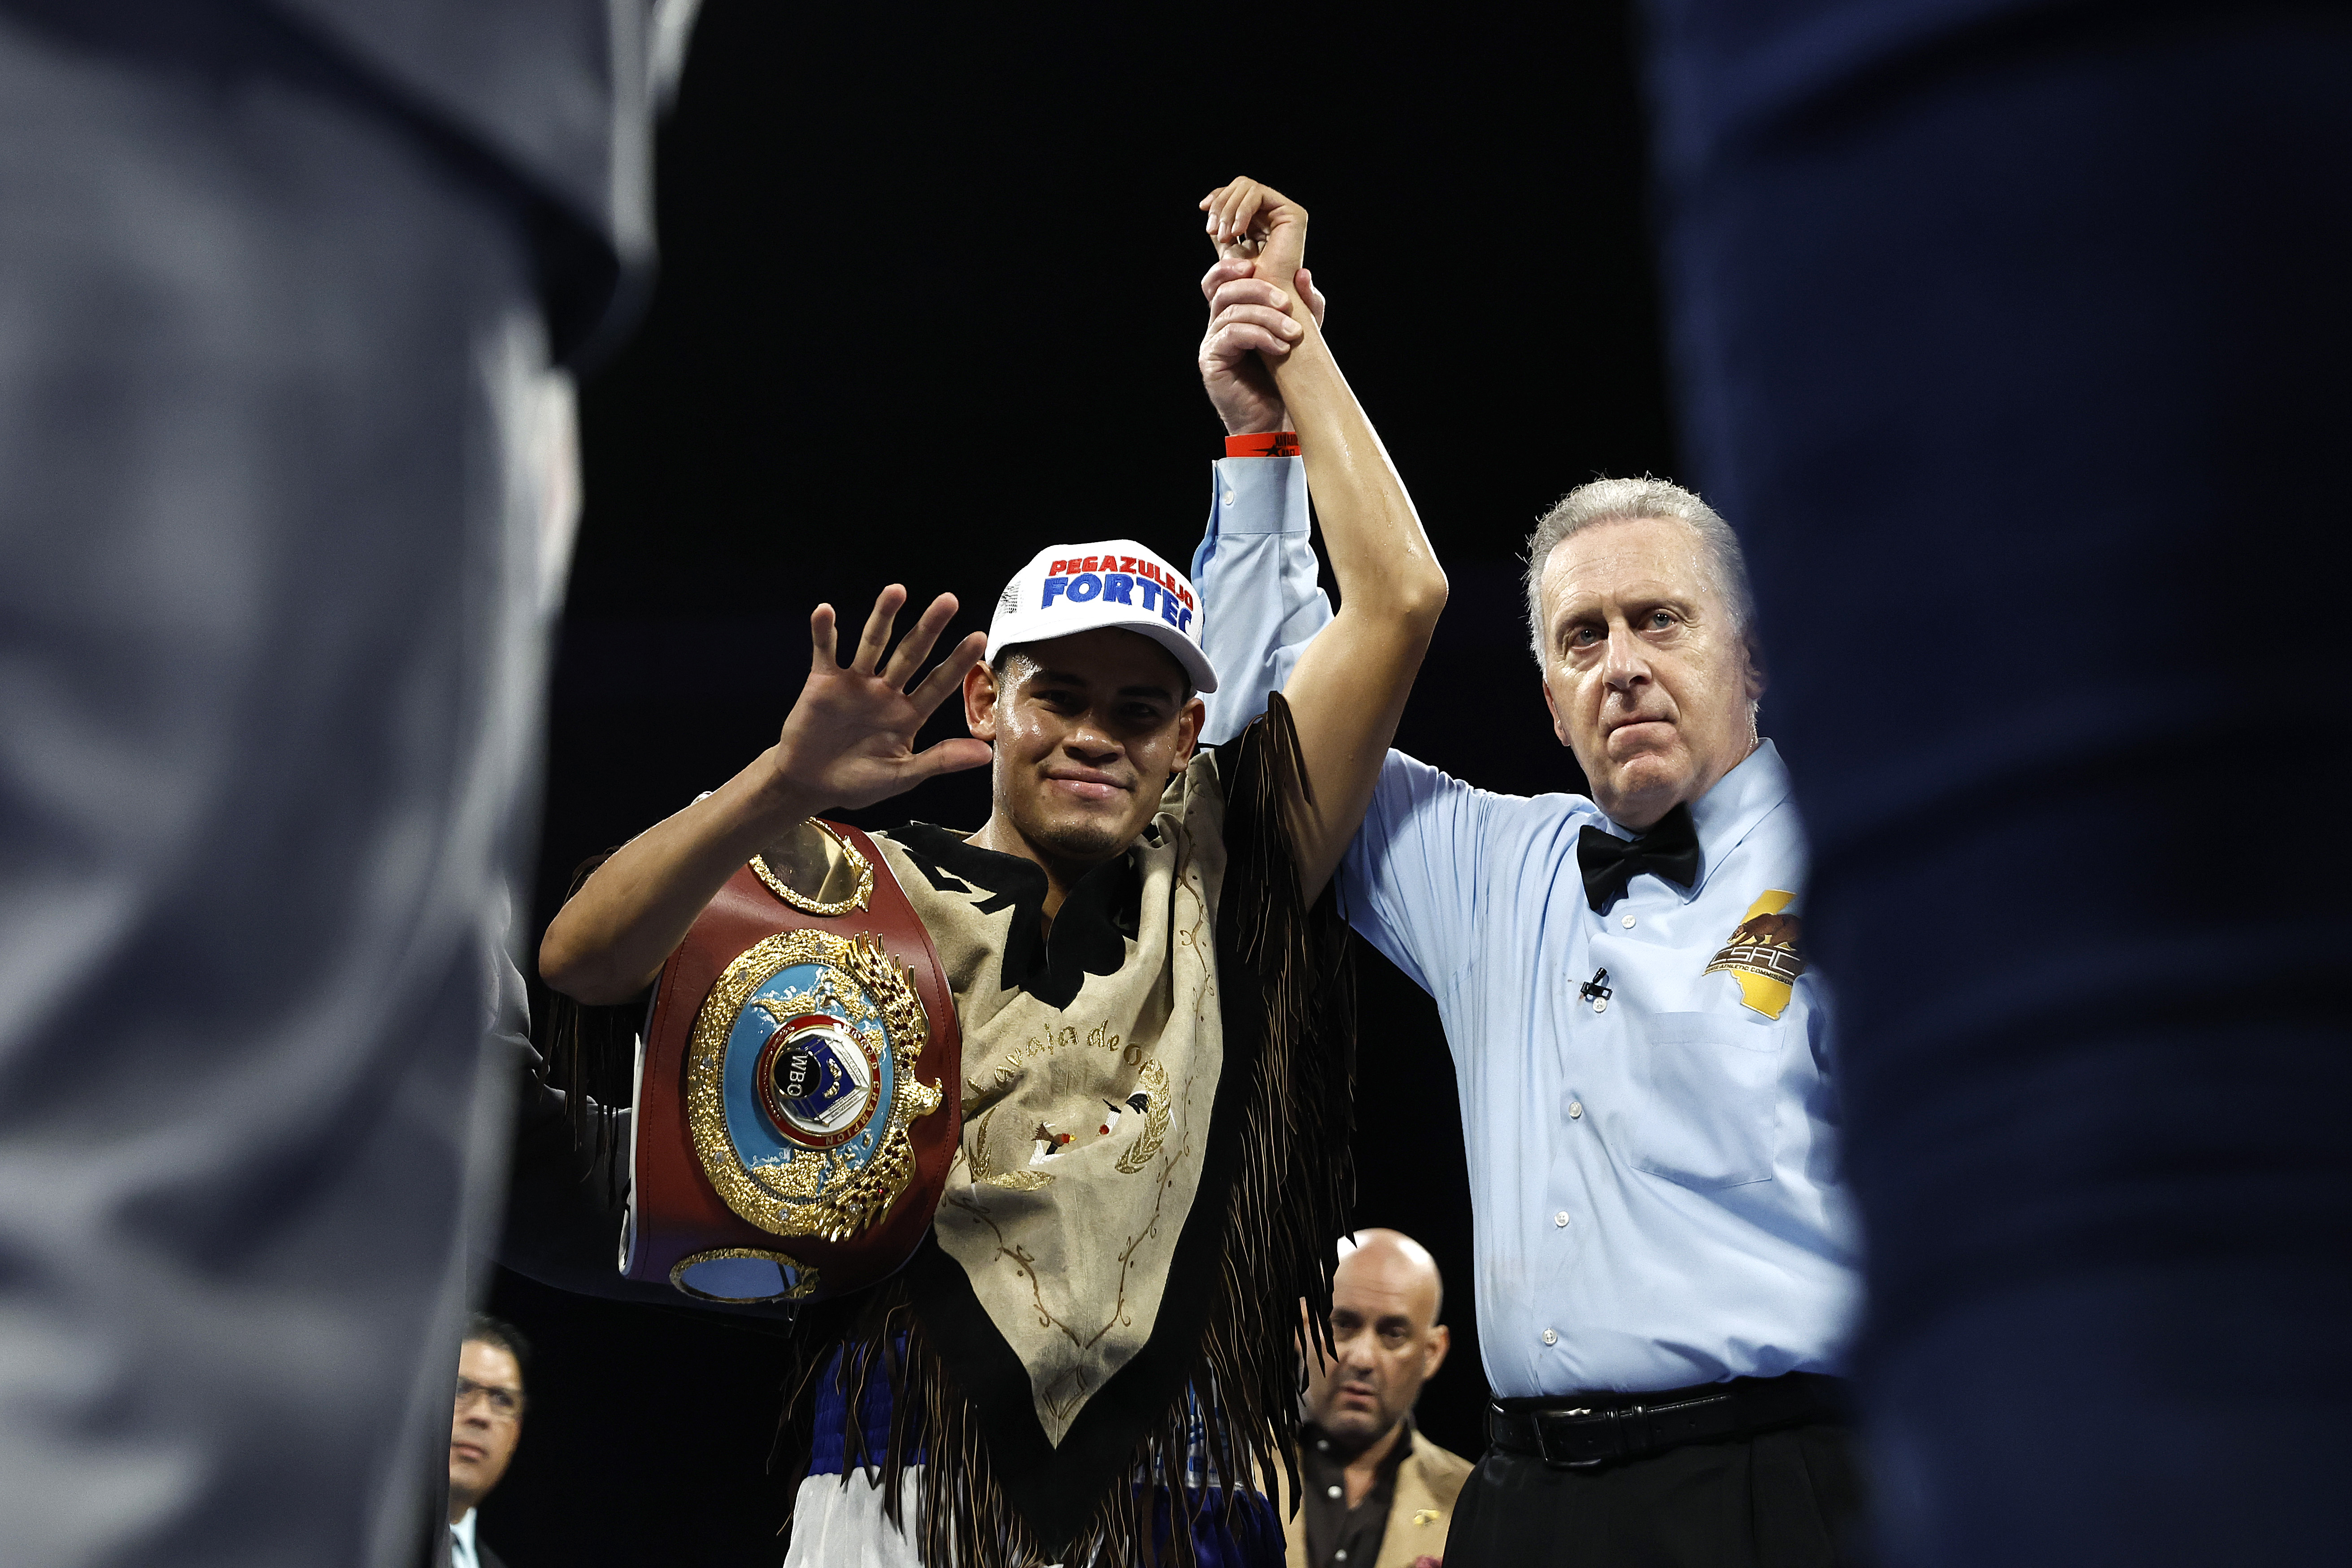 Emanuel Navarrete is now “super champion” for the WBO at 130